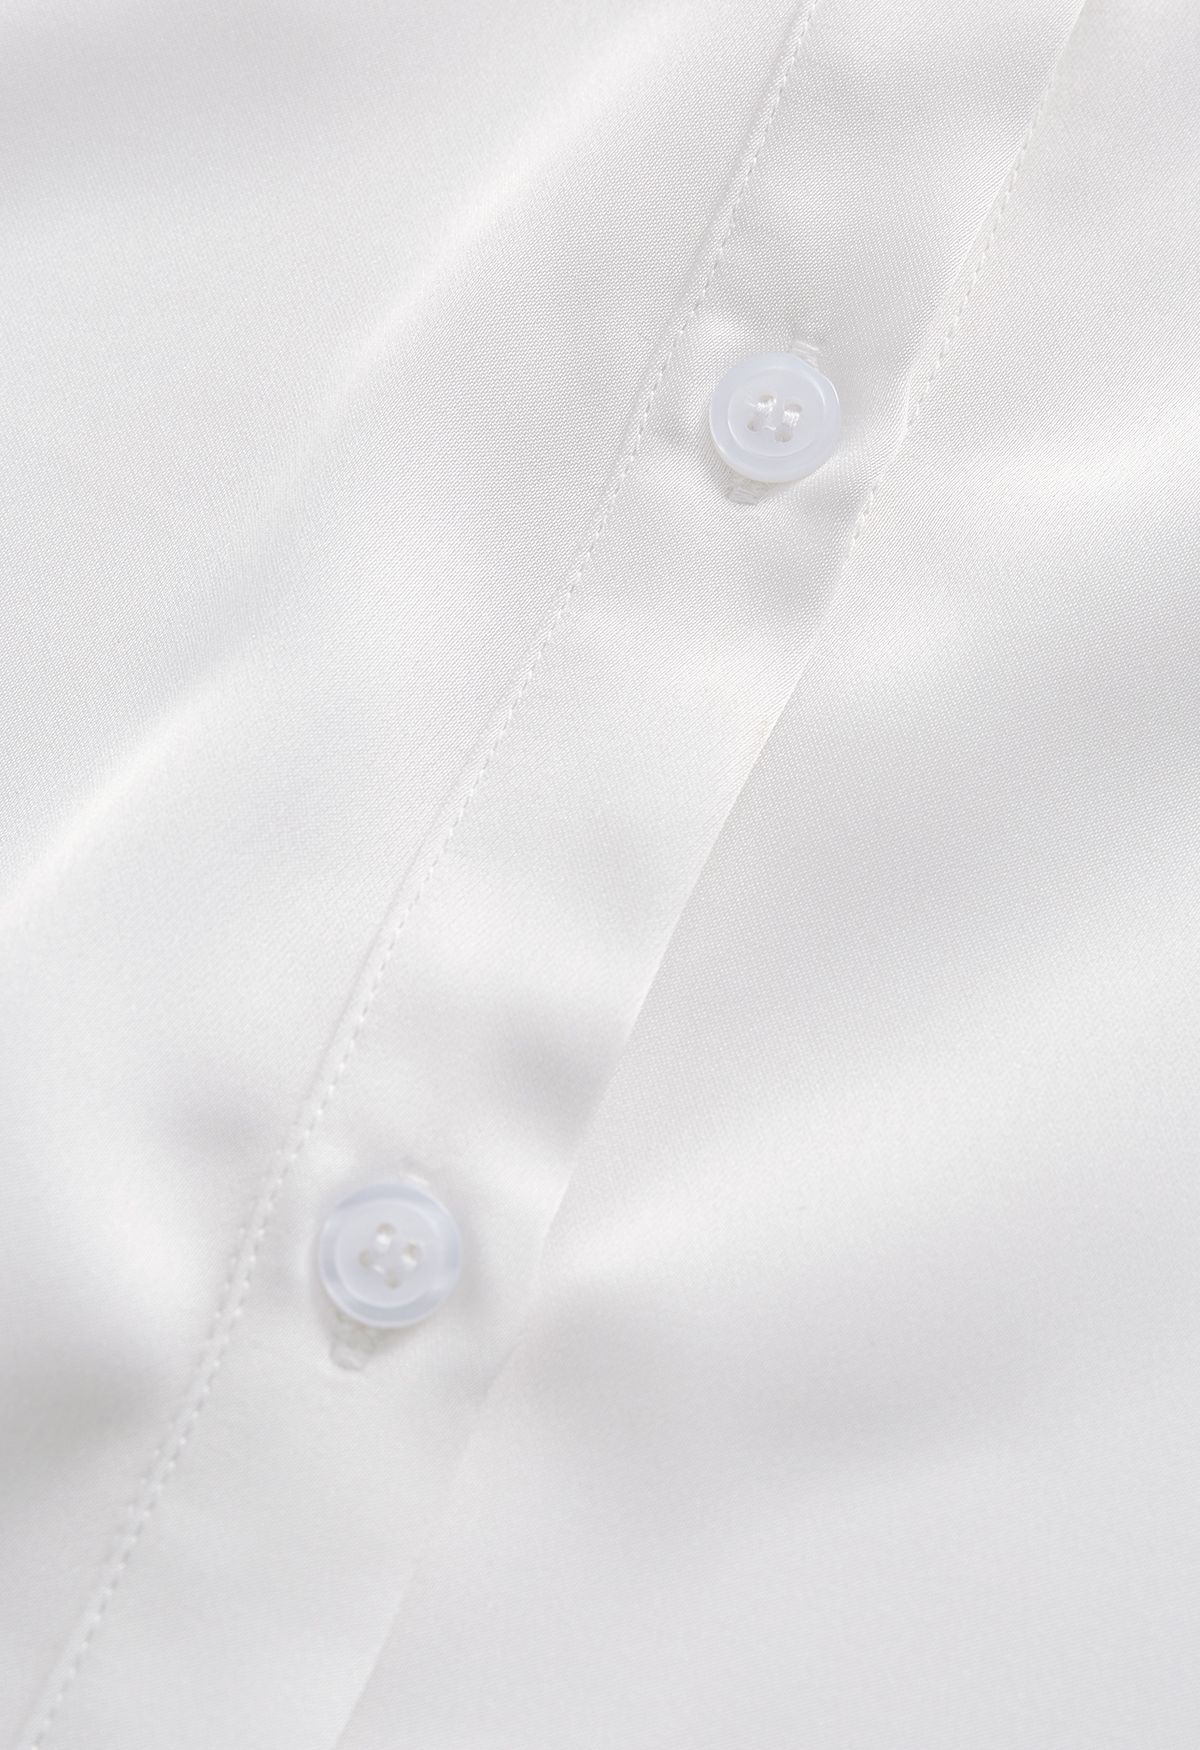 Satin Finish Button Up Shirt in White